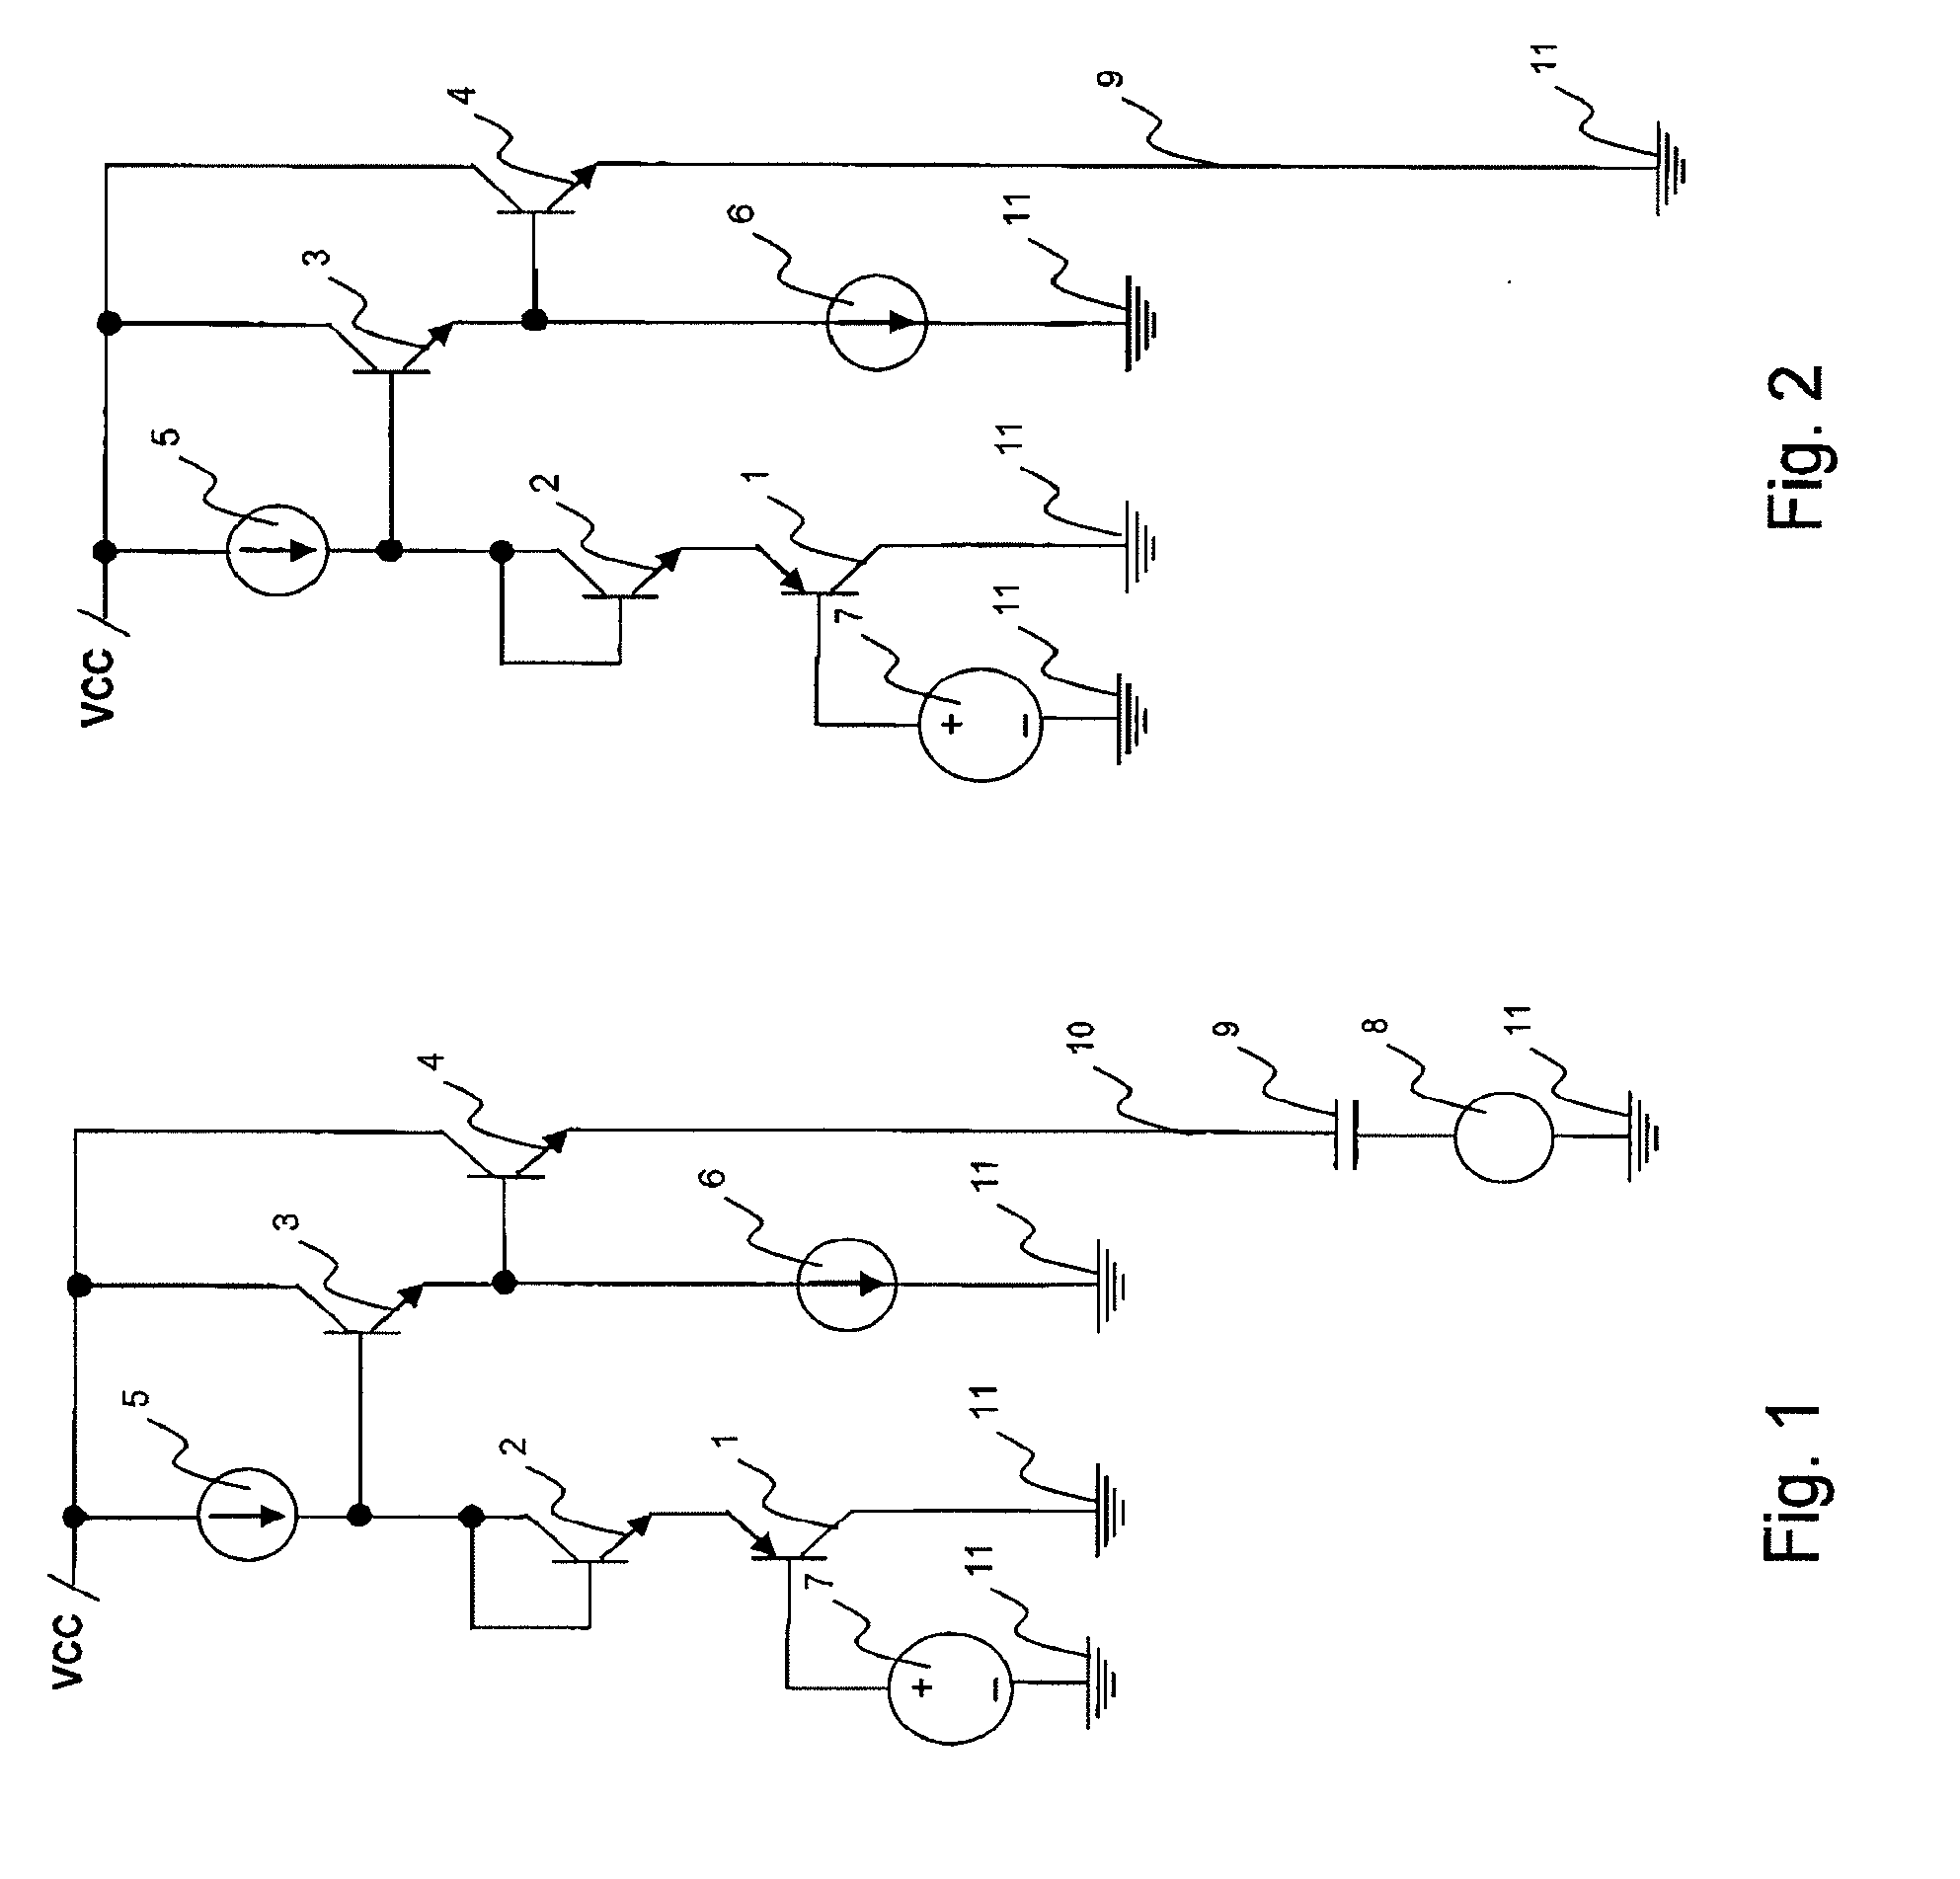 Ground detection circuit for video signal driver to prevent large clamp transistor current